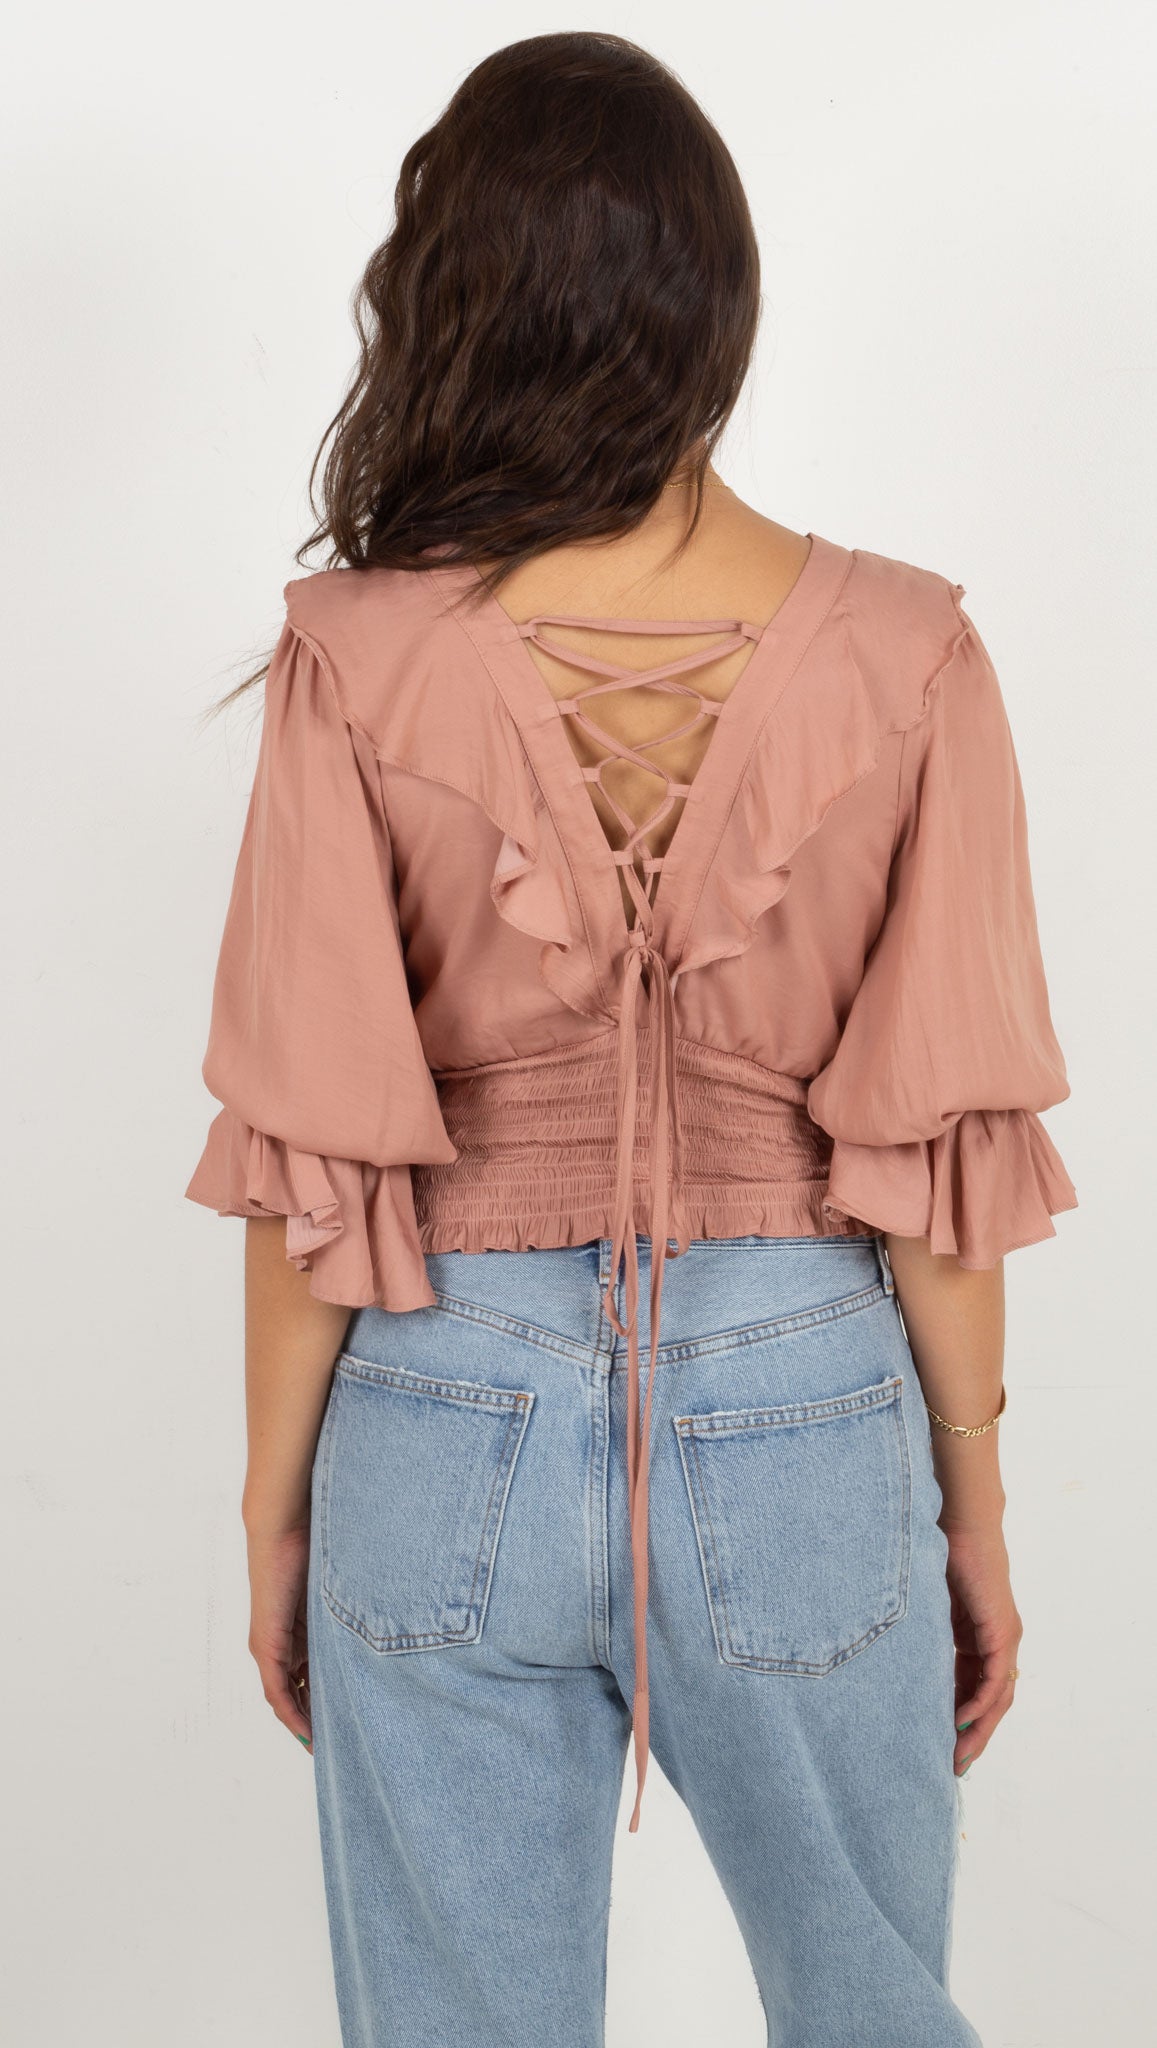 Chantelle Lace Up Back Smocked Top - Rosette